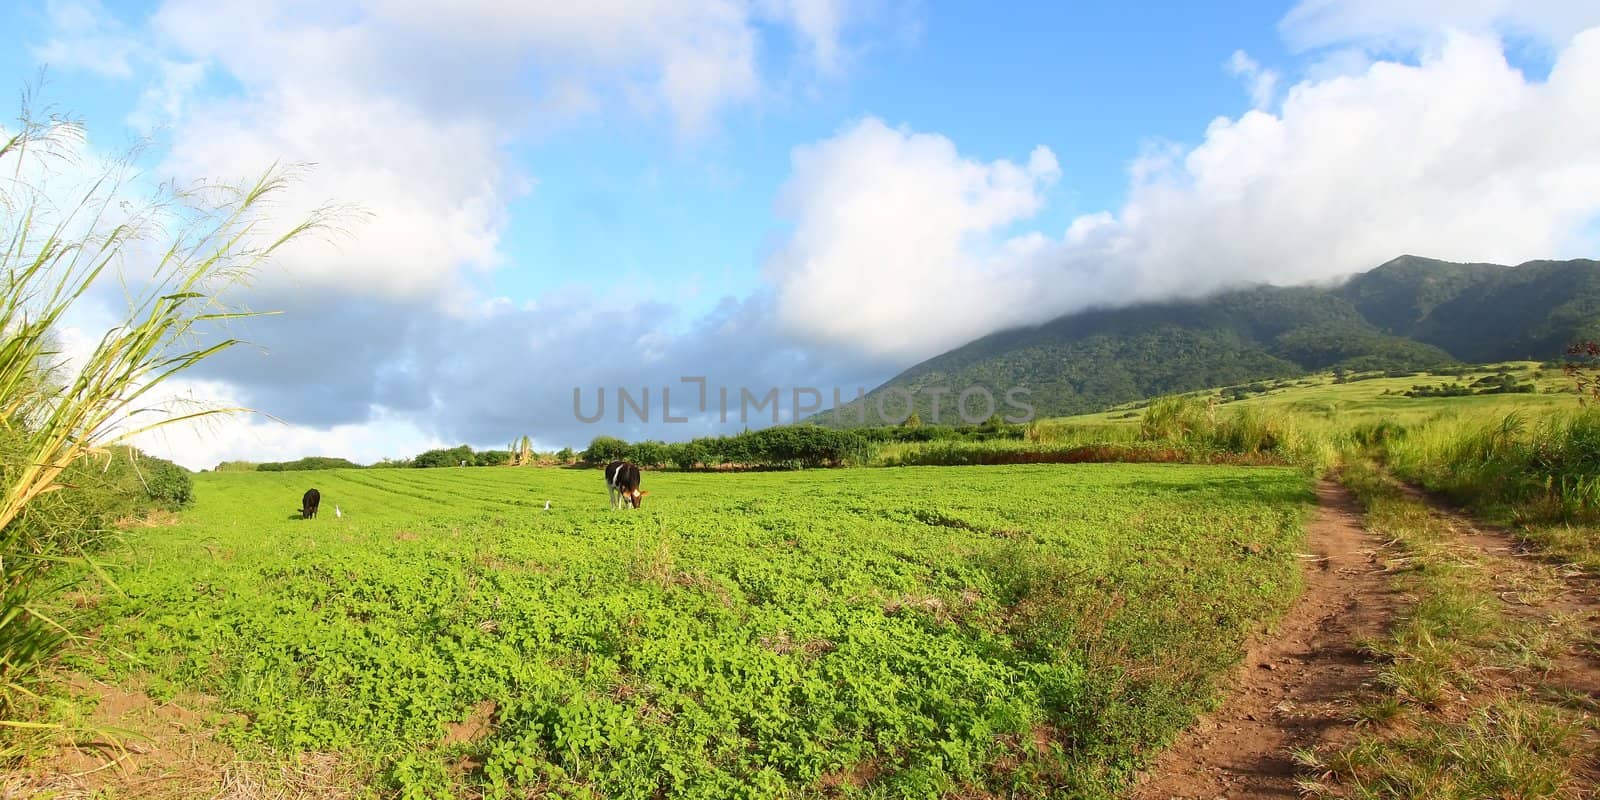 Landscape of the agricultural areas of Saint Kitts.